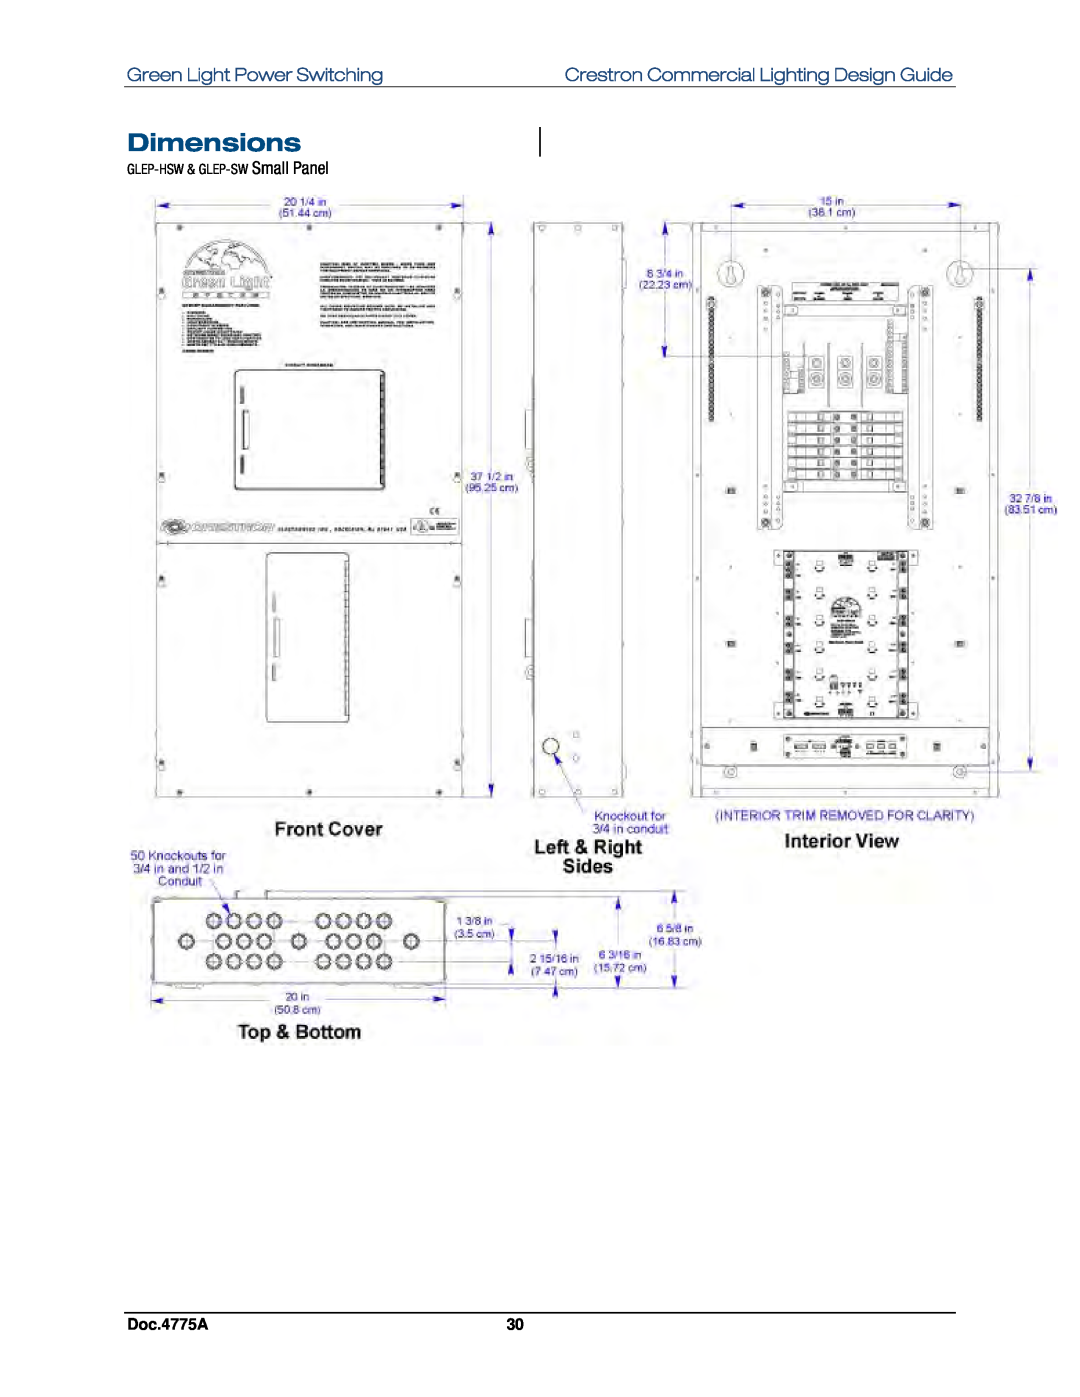 Crestron electronic GLPS-HDSW-FT manual Dimensions, Green Light Power Switching, Crestron Commercial Lighting Design Guide 